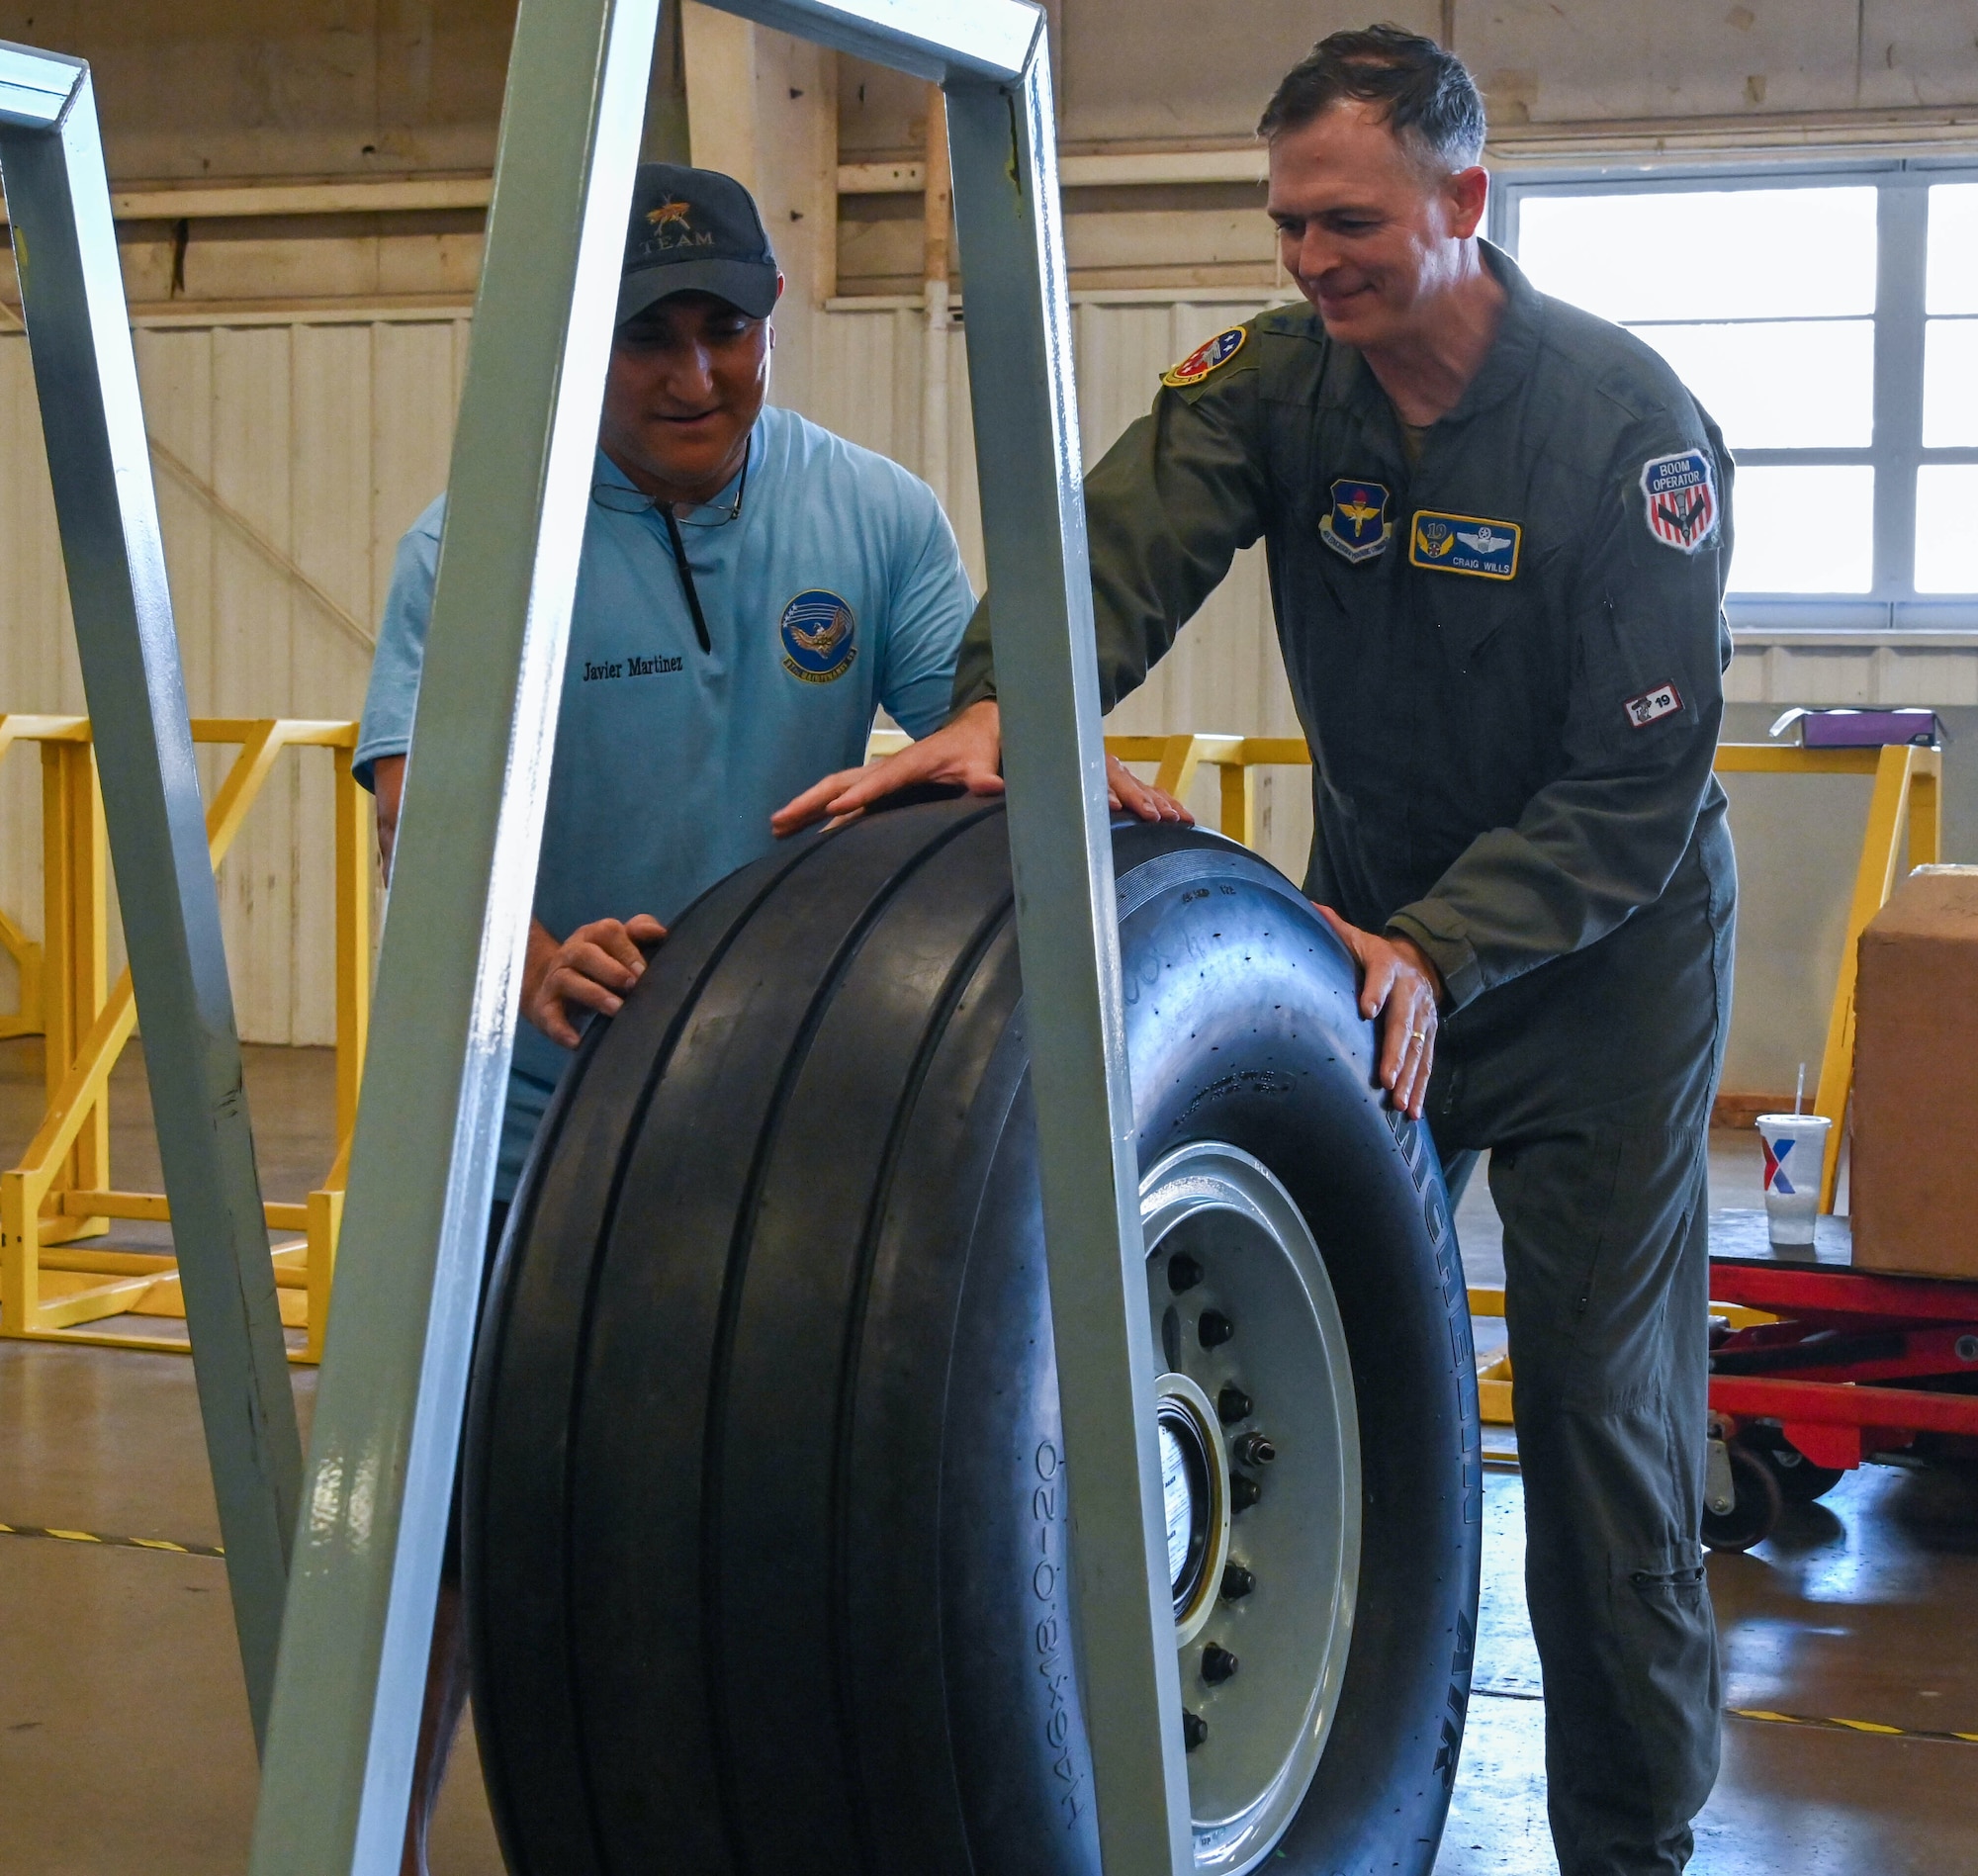 U.S. Air Force Maj. Gen. Craig D. Wills, 19th Air Force commander, rolls out the first in-shop assembled KC-46 Pegasus wheel at Altus Air Force Base, Oklahoma, June 23, 2022. Members of the 97th Maintenance Squadron demonstrated the new process of assembling KC-46 tires to Wills at a recent visit. (U.S. Air Force photo by Senior Airman Kayla Christenson)